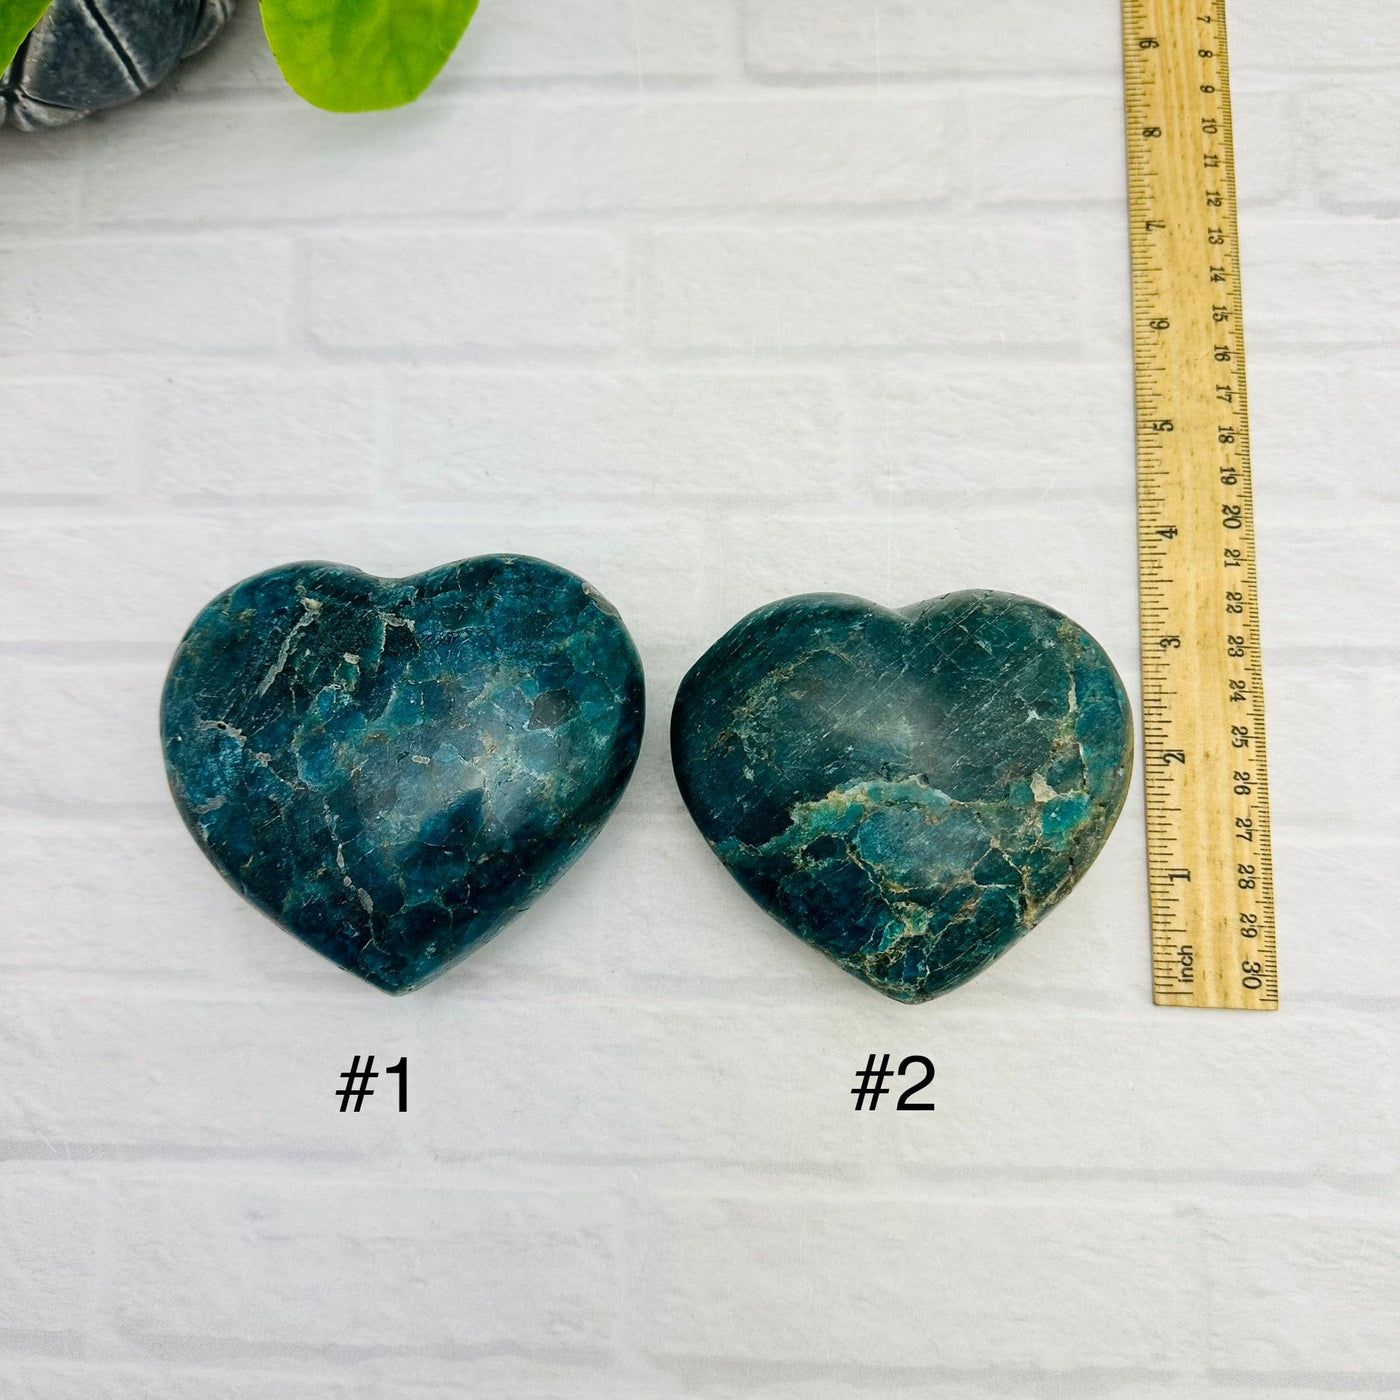 Polished Blue Apatite Hearts - YOU CHOOSE - choice number one and two with a ruler for size refence 